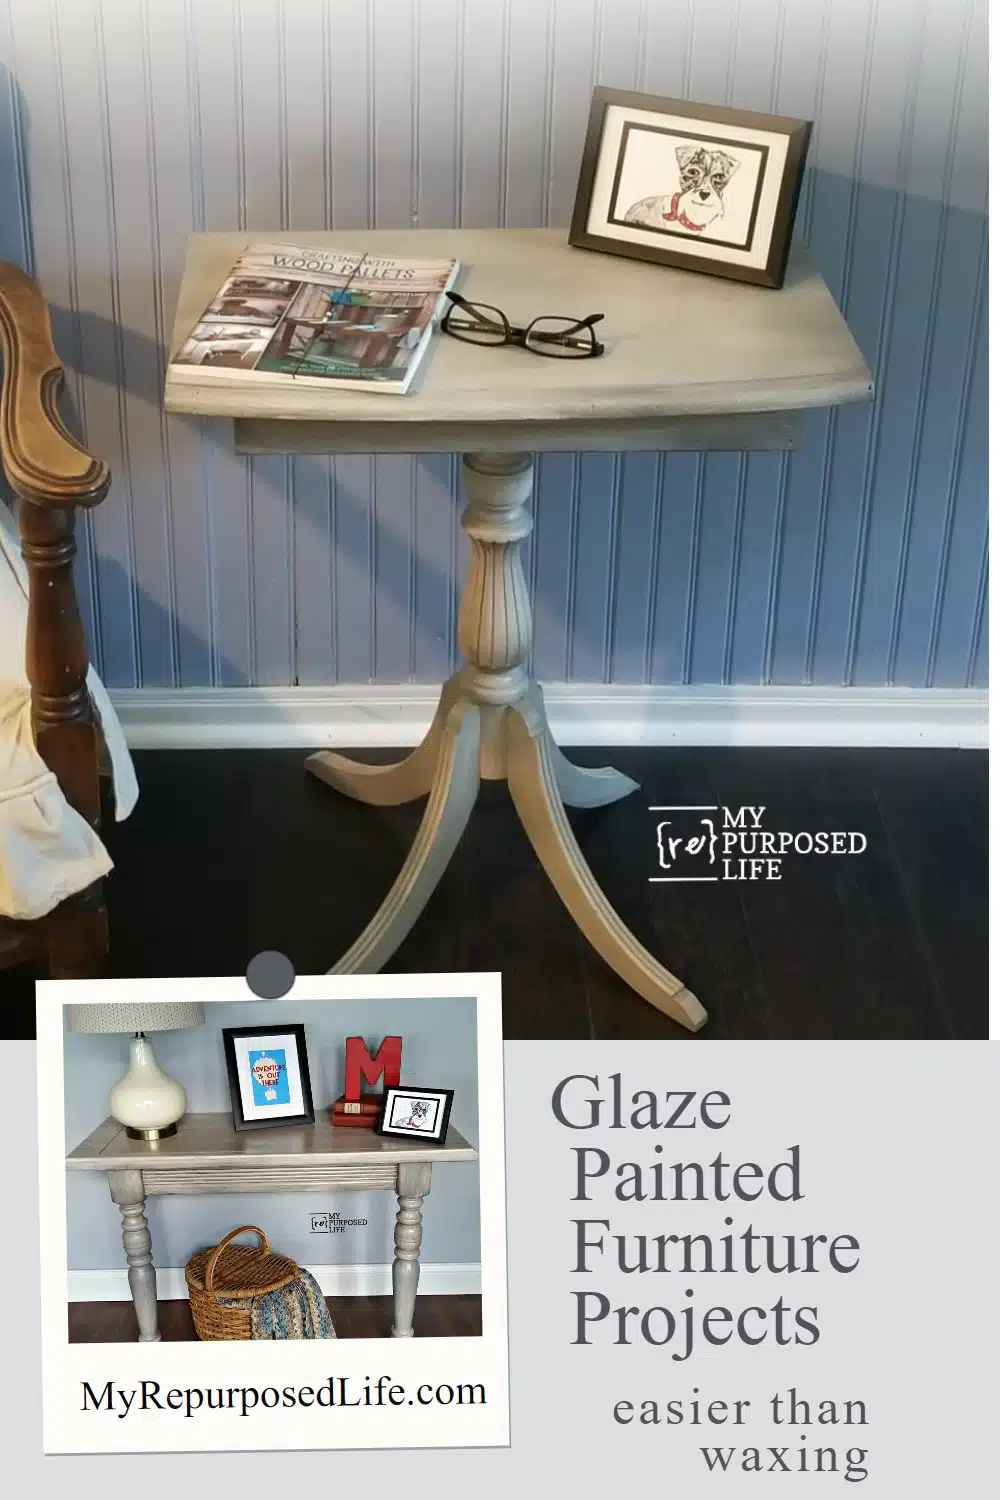 Glazing not only adds depth to your projects, it also helps protect the finish eliminating the need to wax. The same glaze can give so many different looks depending on how heavy it is applied. #MyRepurposedLife #repurposed #furniture #projects #homedecor #glaze #glazing #nowaxing via @repurposedlife